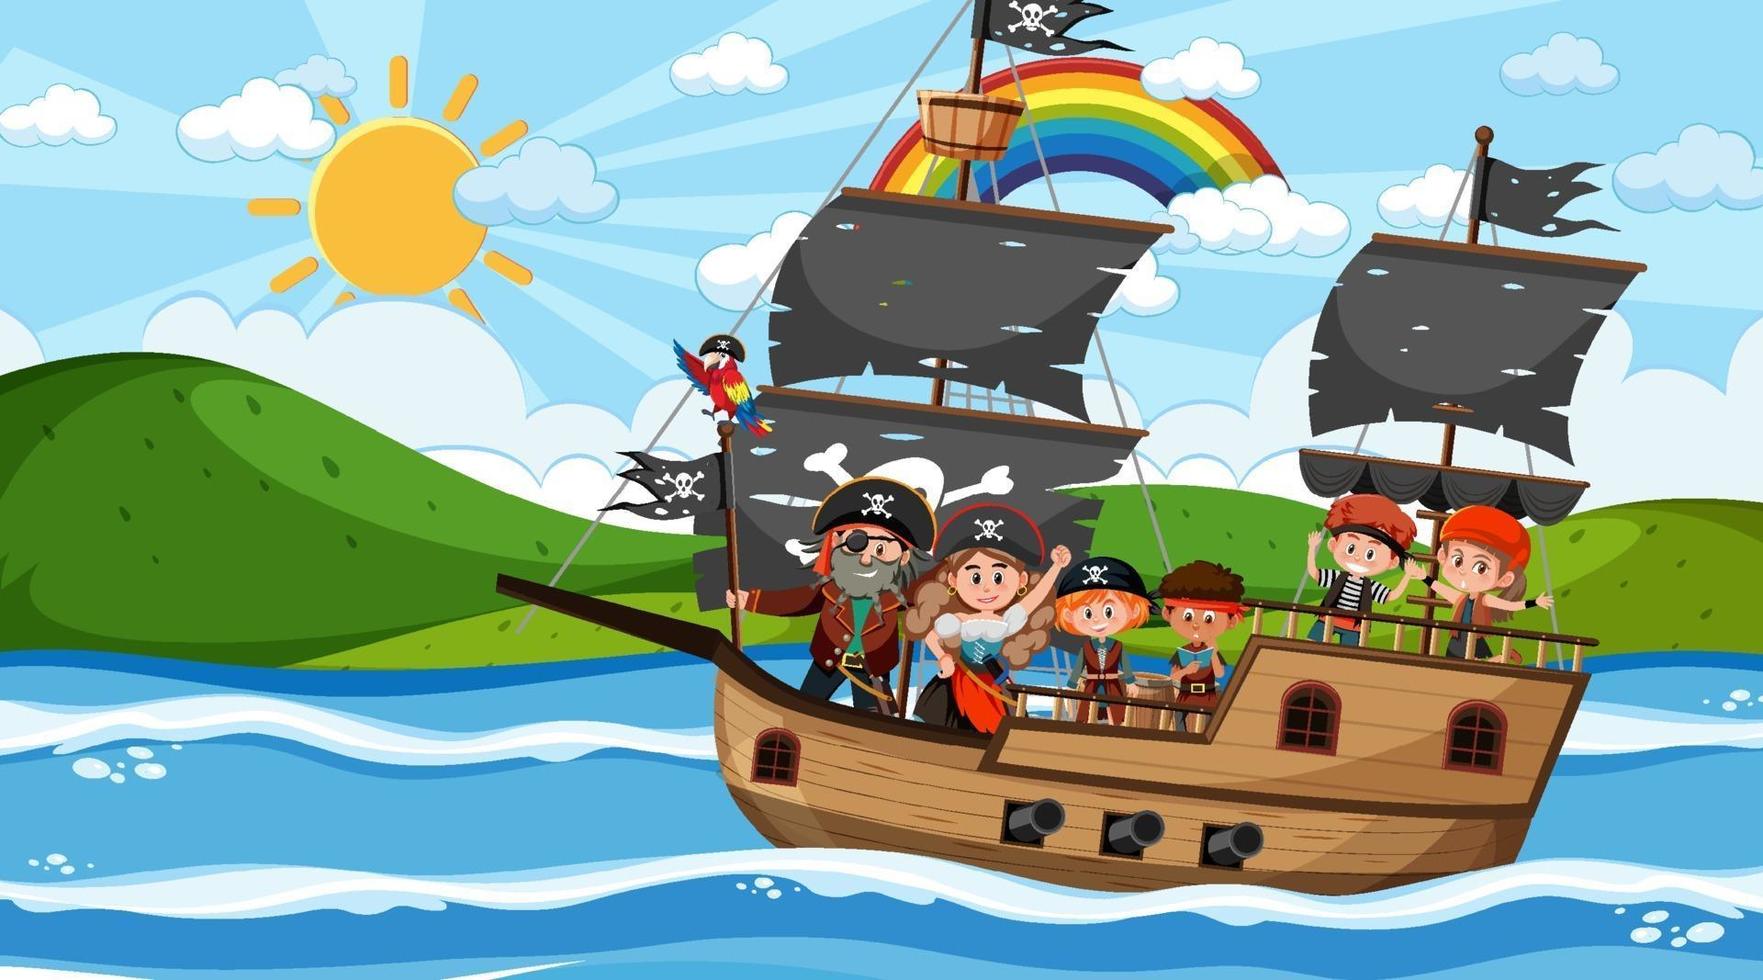 Ocean scene at daytime with Pirate kids on the ship vector